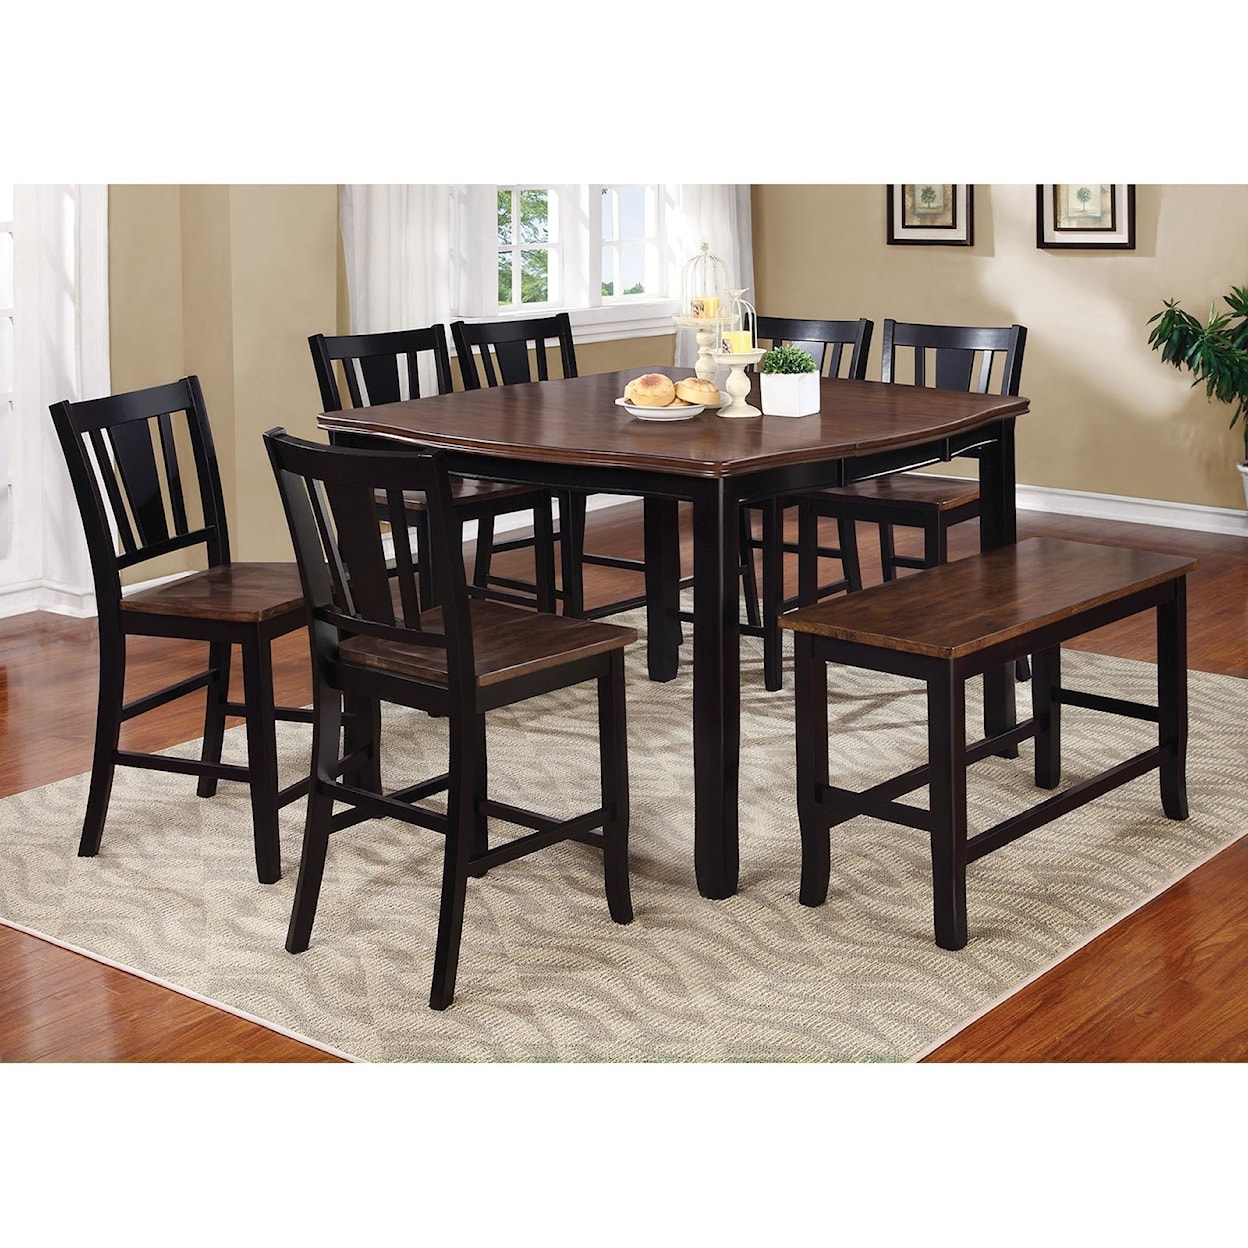 Furniture of America Dover II Table + 8 Side Chairs